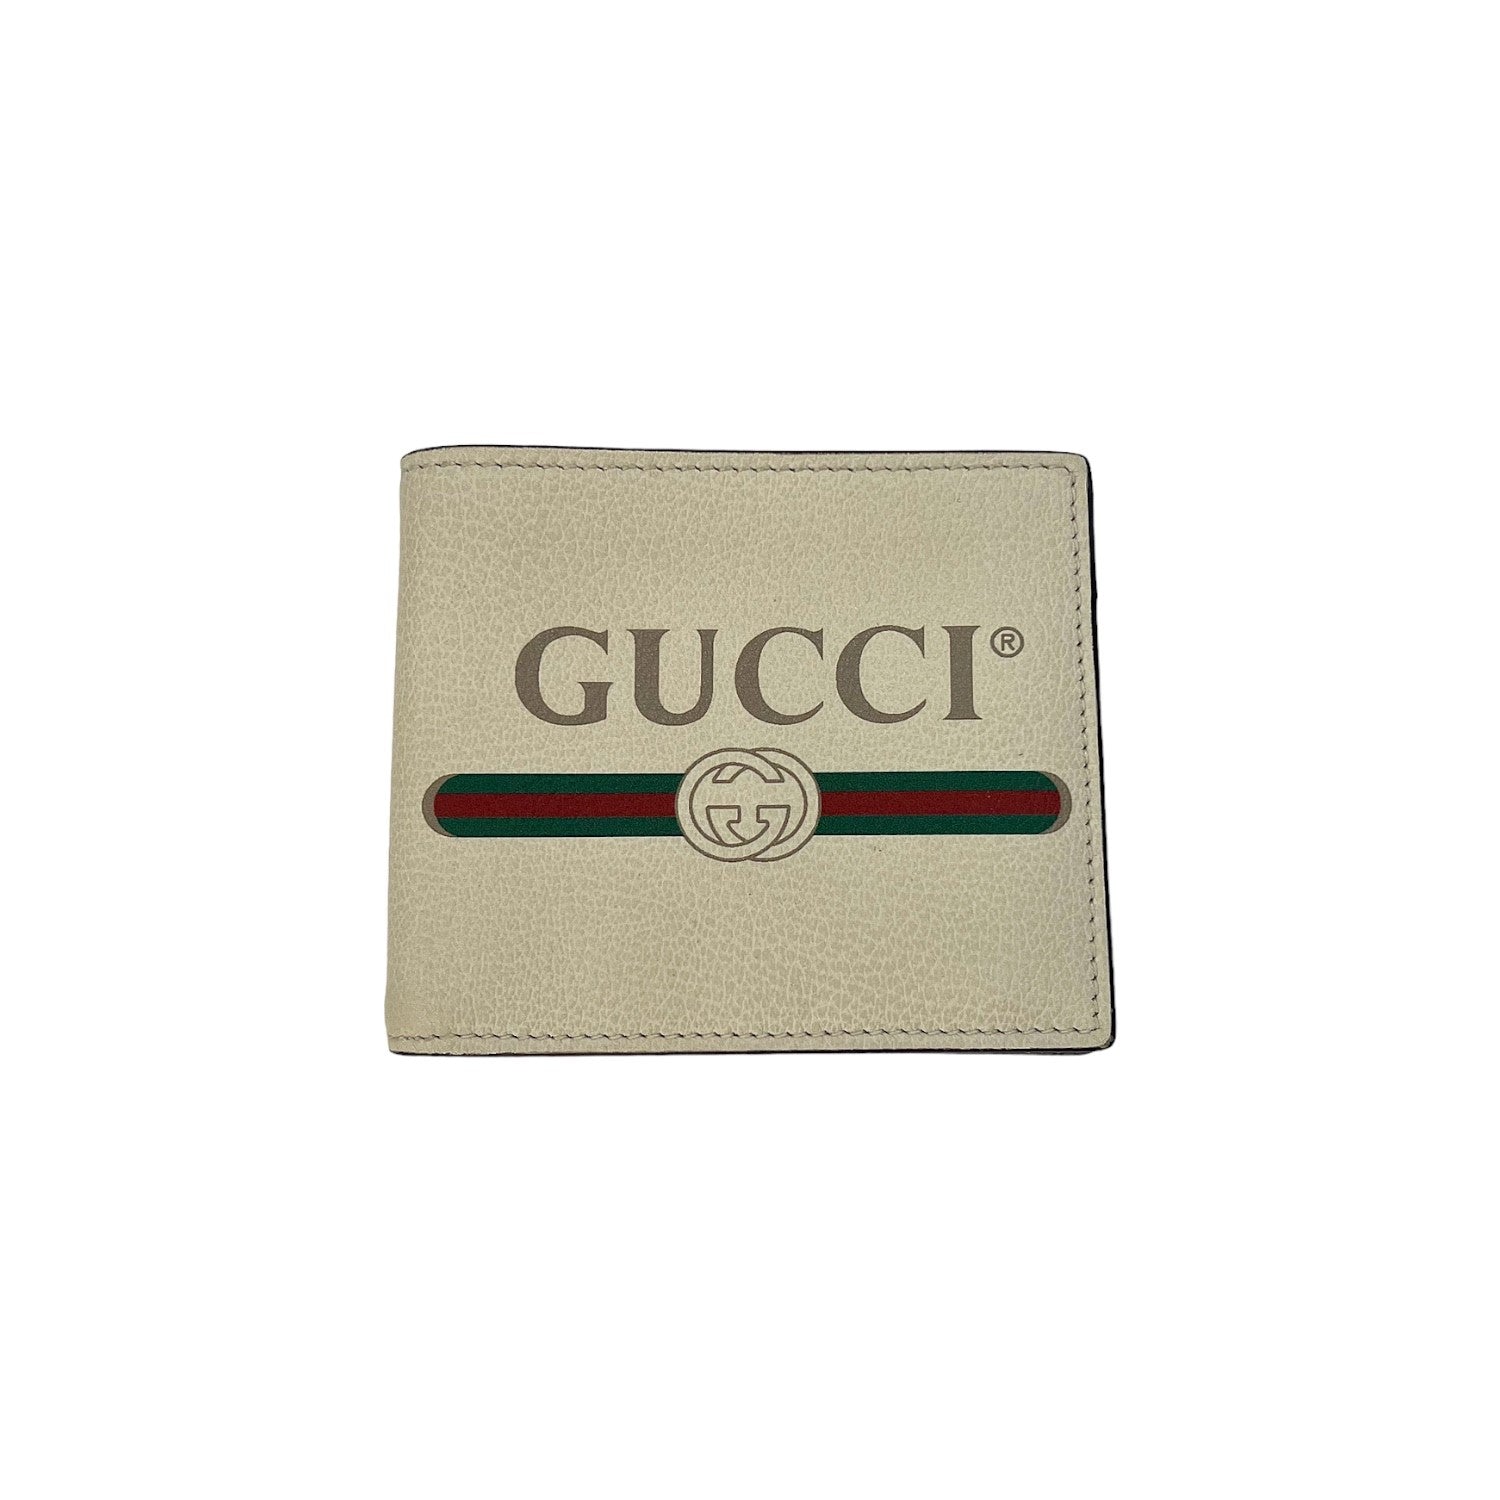 Gucci Leather Graphic Print Bifold Wallet - TheRelux.com